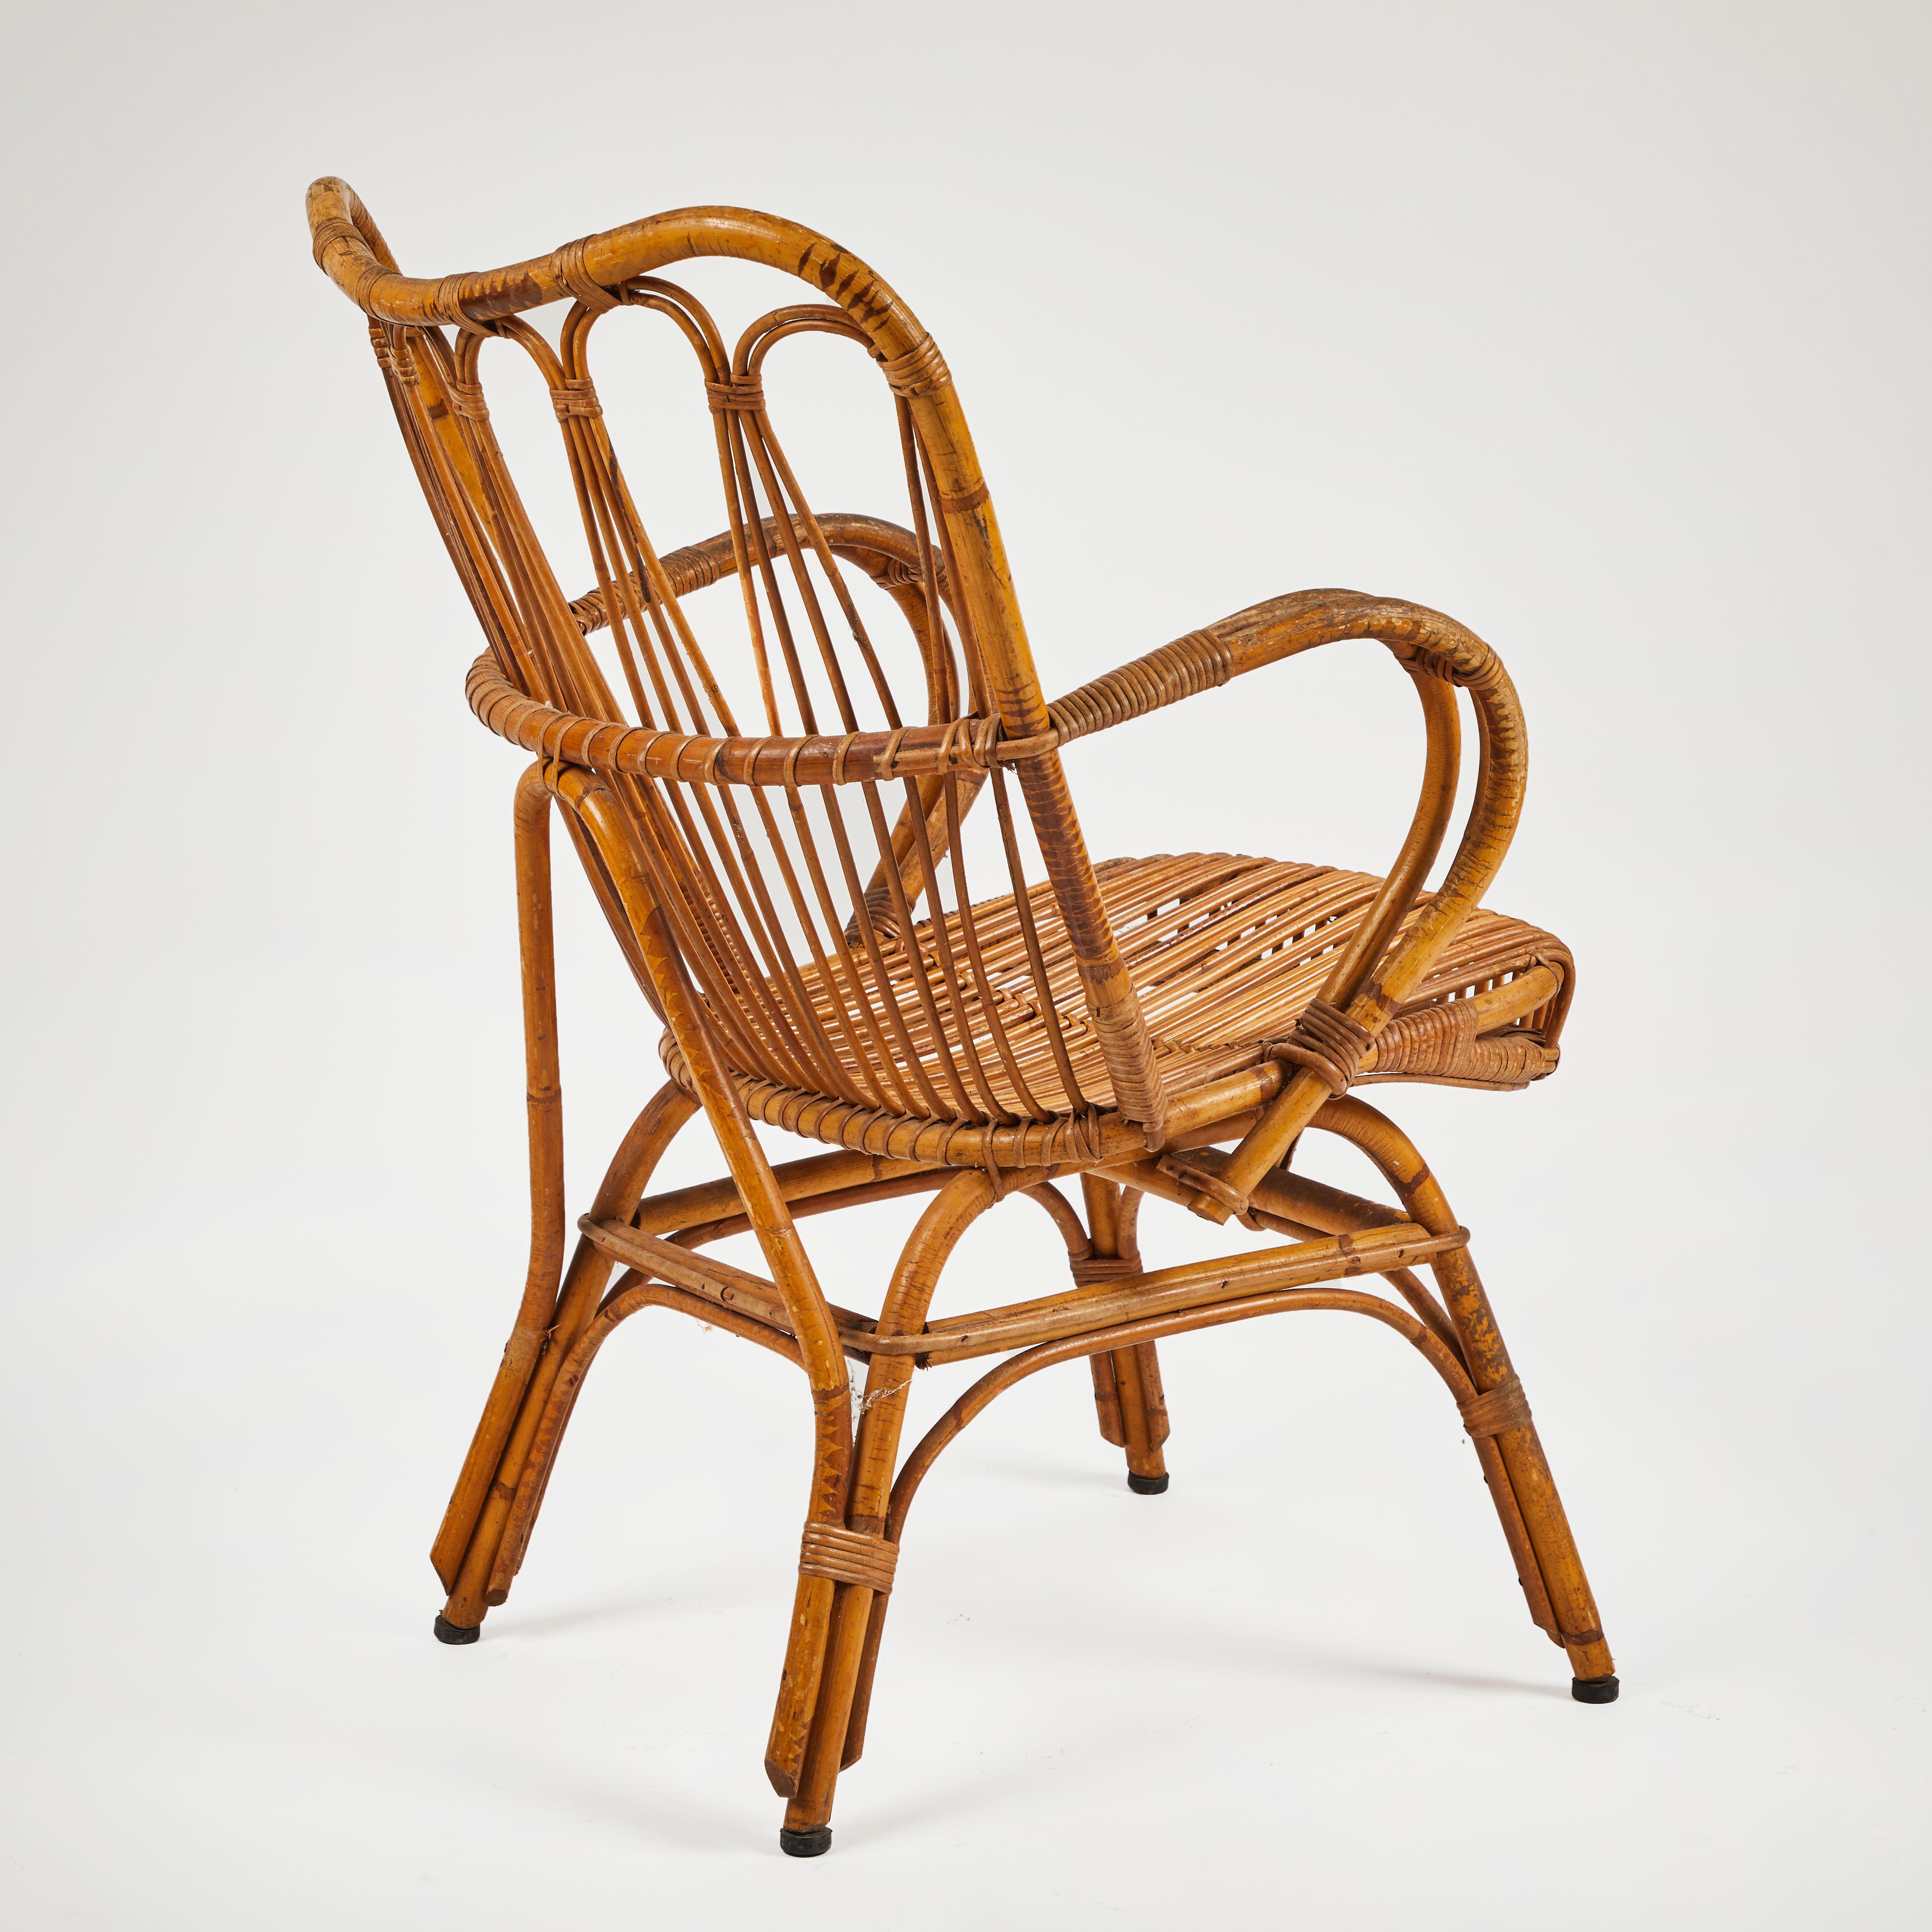 A rattan armchair dating from 1960s France. Stable, Sturdy and Decorative.